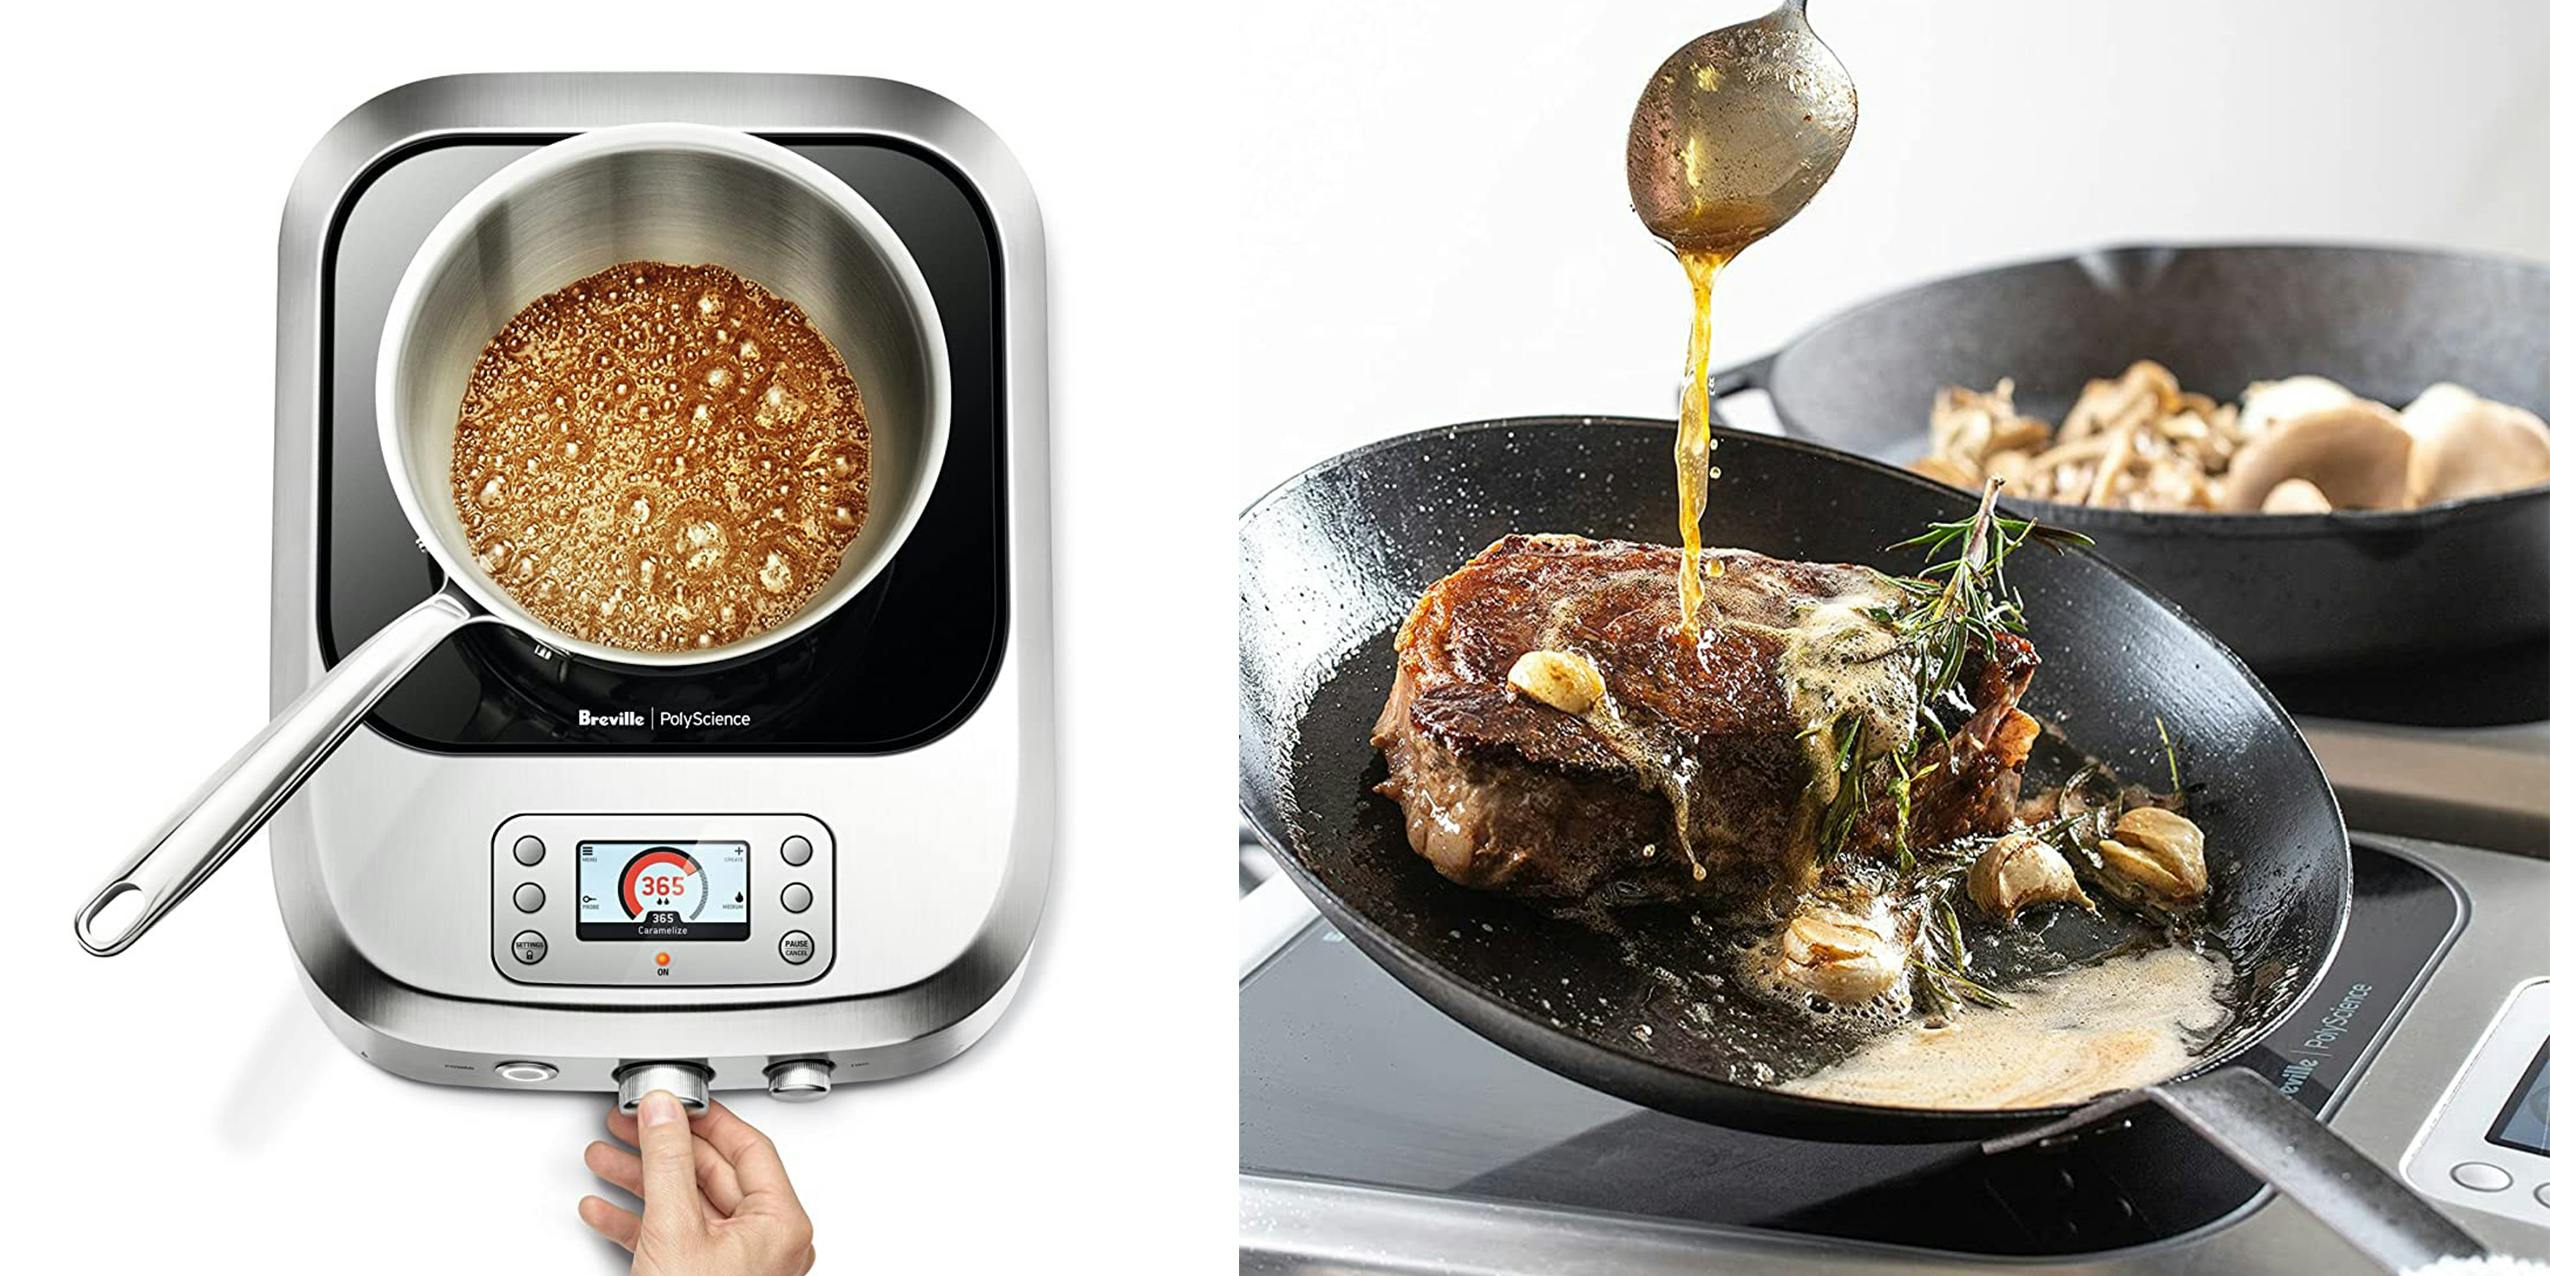 One of the best kitchen gadgets Breville Control Freak induction cooktop making caramel and steak.